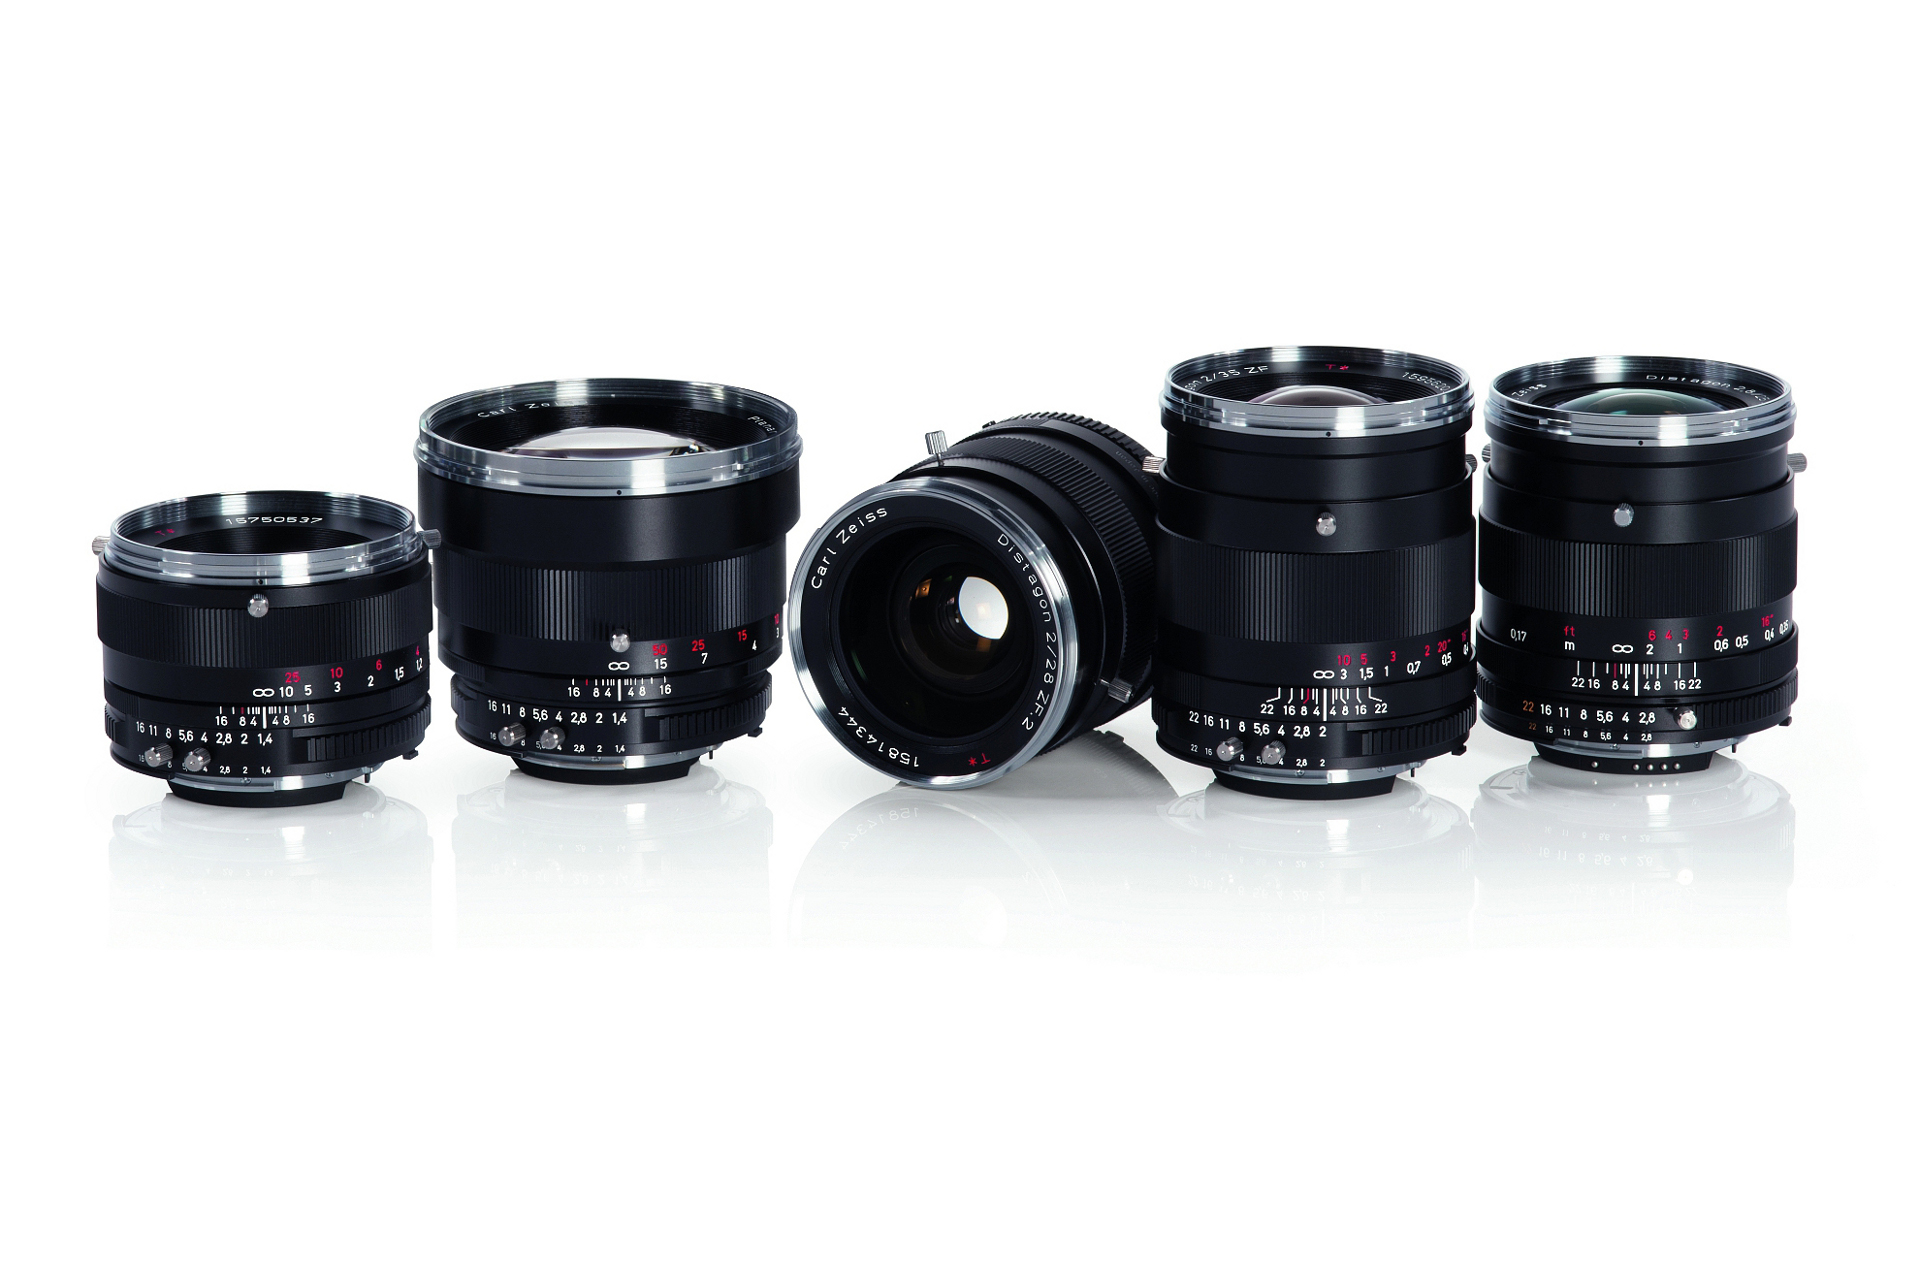 ZEISS Classic Lenses | Proven optical design in a sturdy metal housing